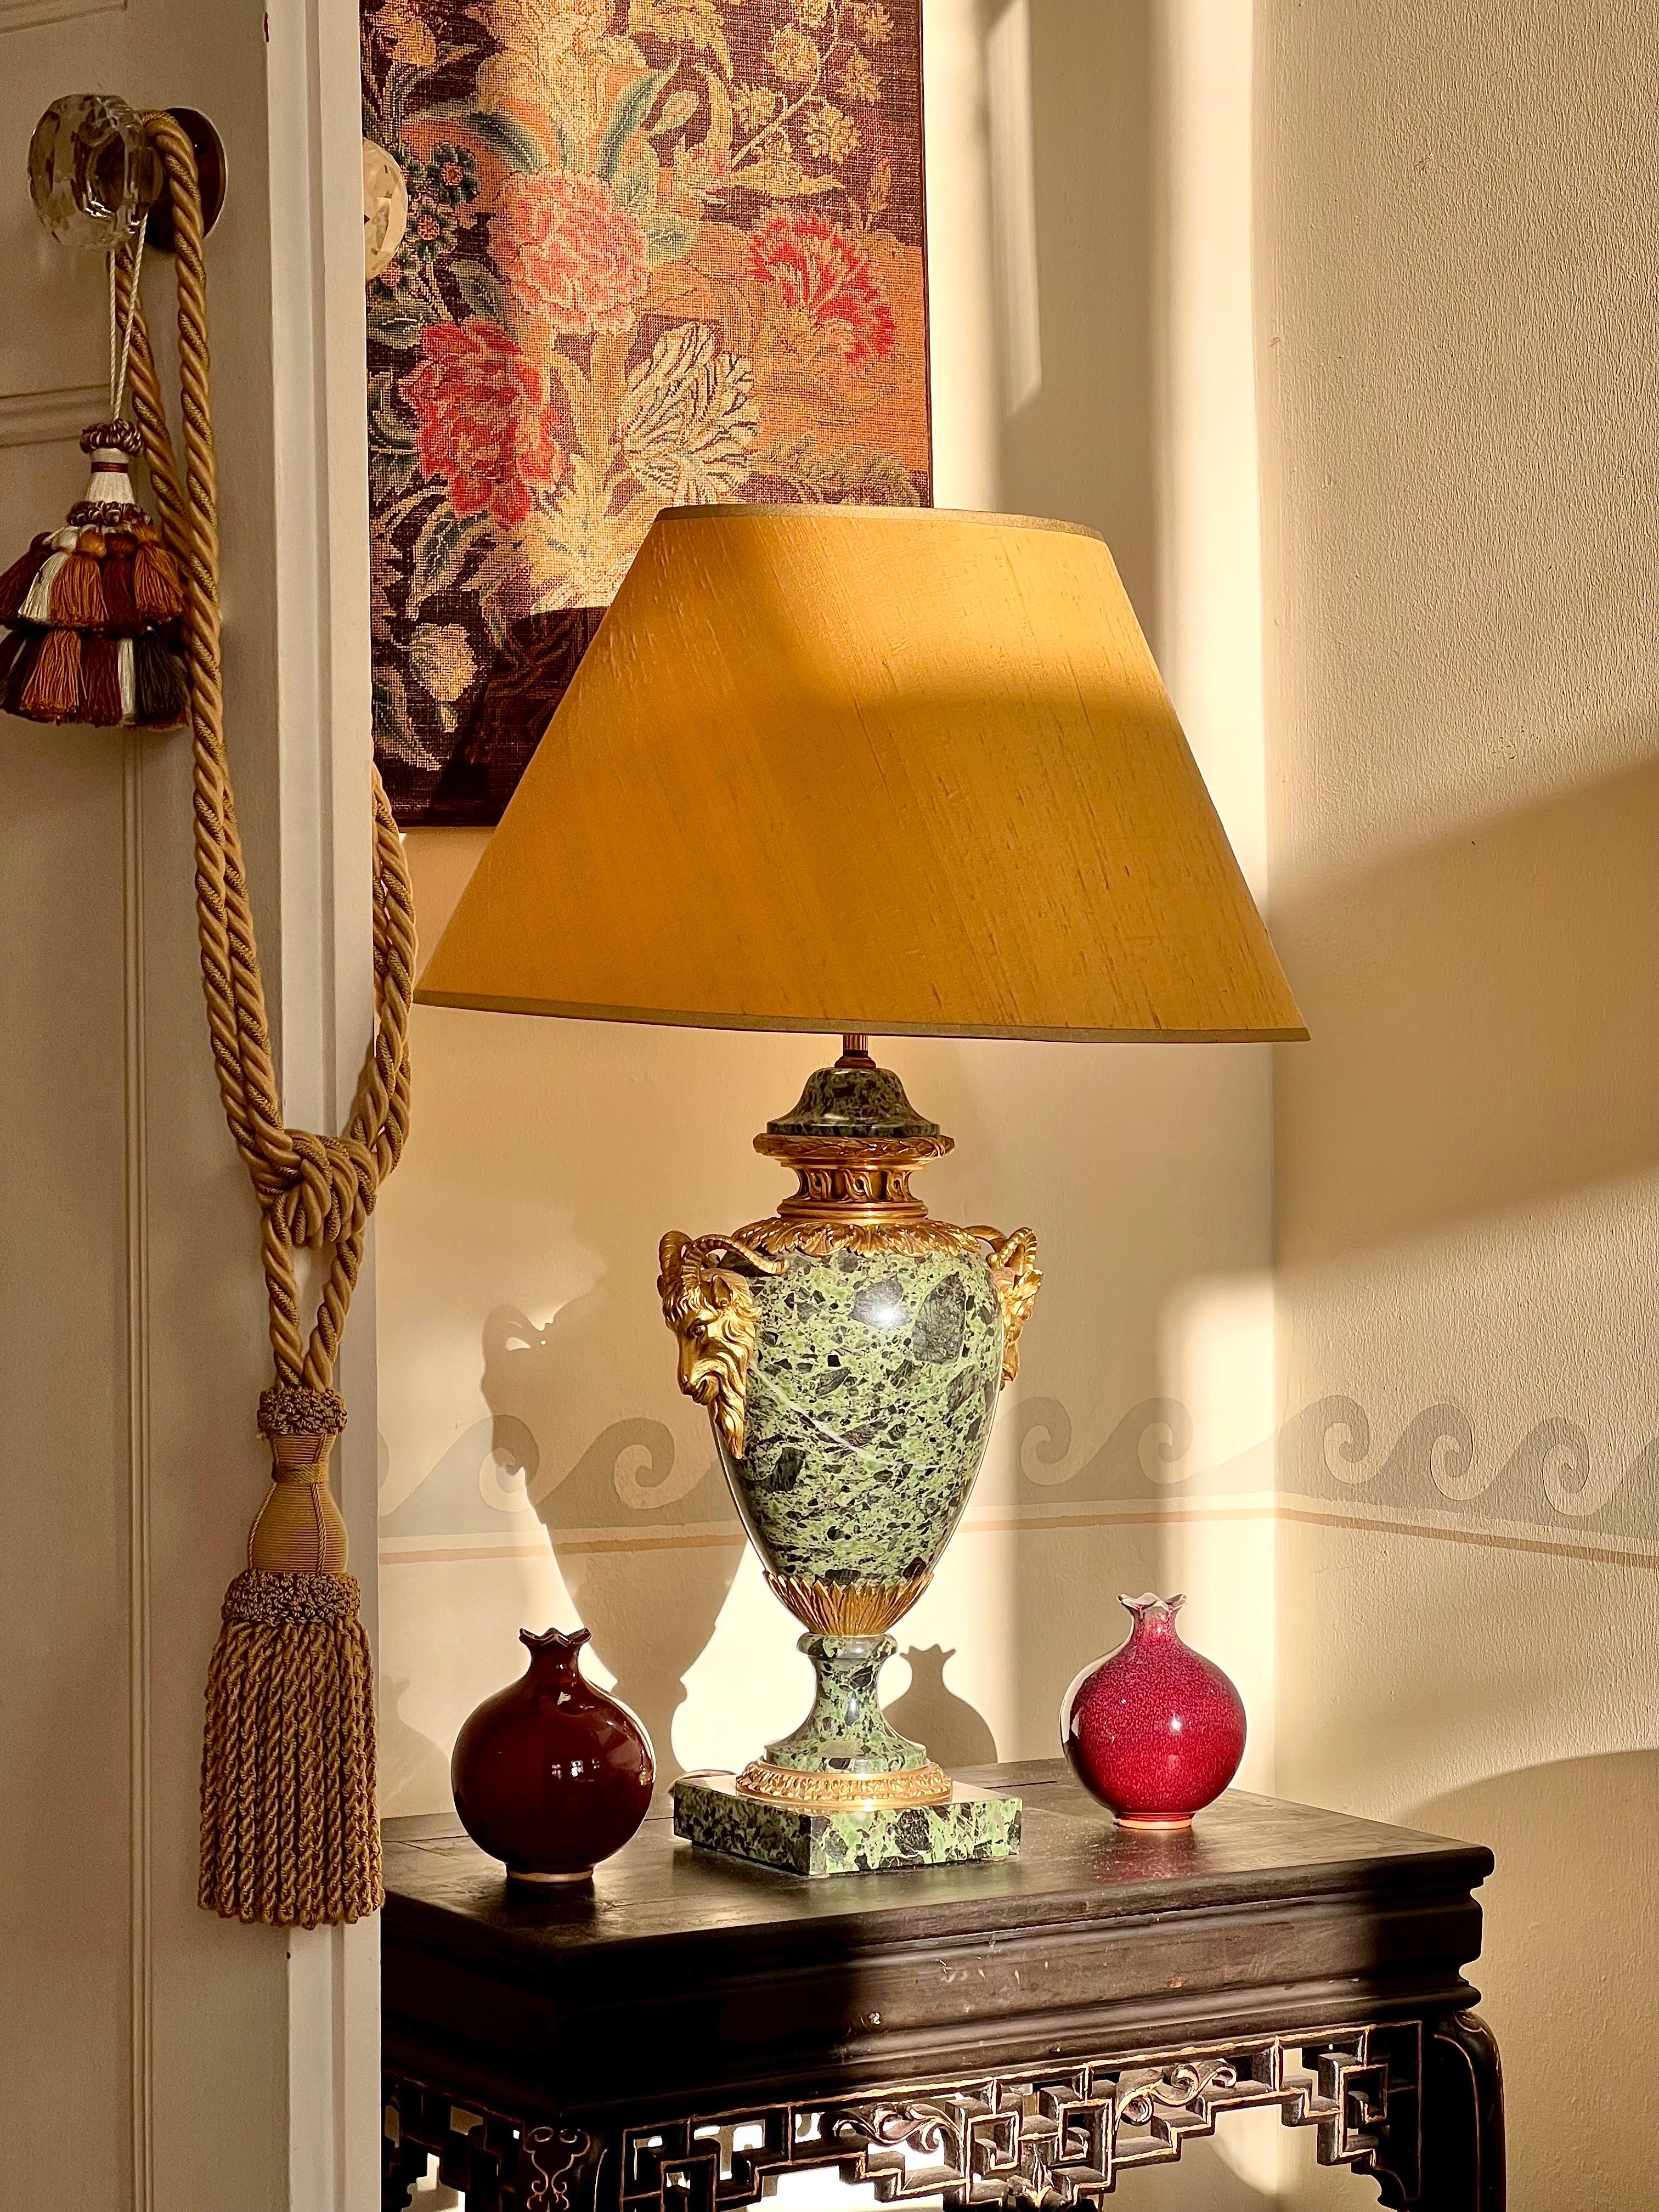 A superb quality gilt bronze mounted urn in breccia verde d’Egitto marble, now fitted as table lamp.
France or Italy, late 19th – early 20th century.

Why we like it
Rare and very decorative marble, superbly cast and chased gilt bronze mounts; a